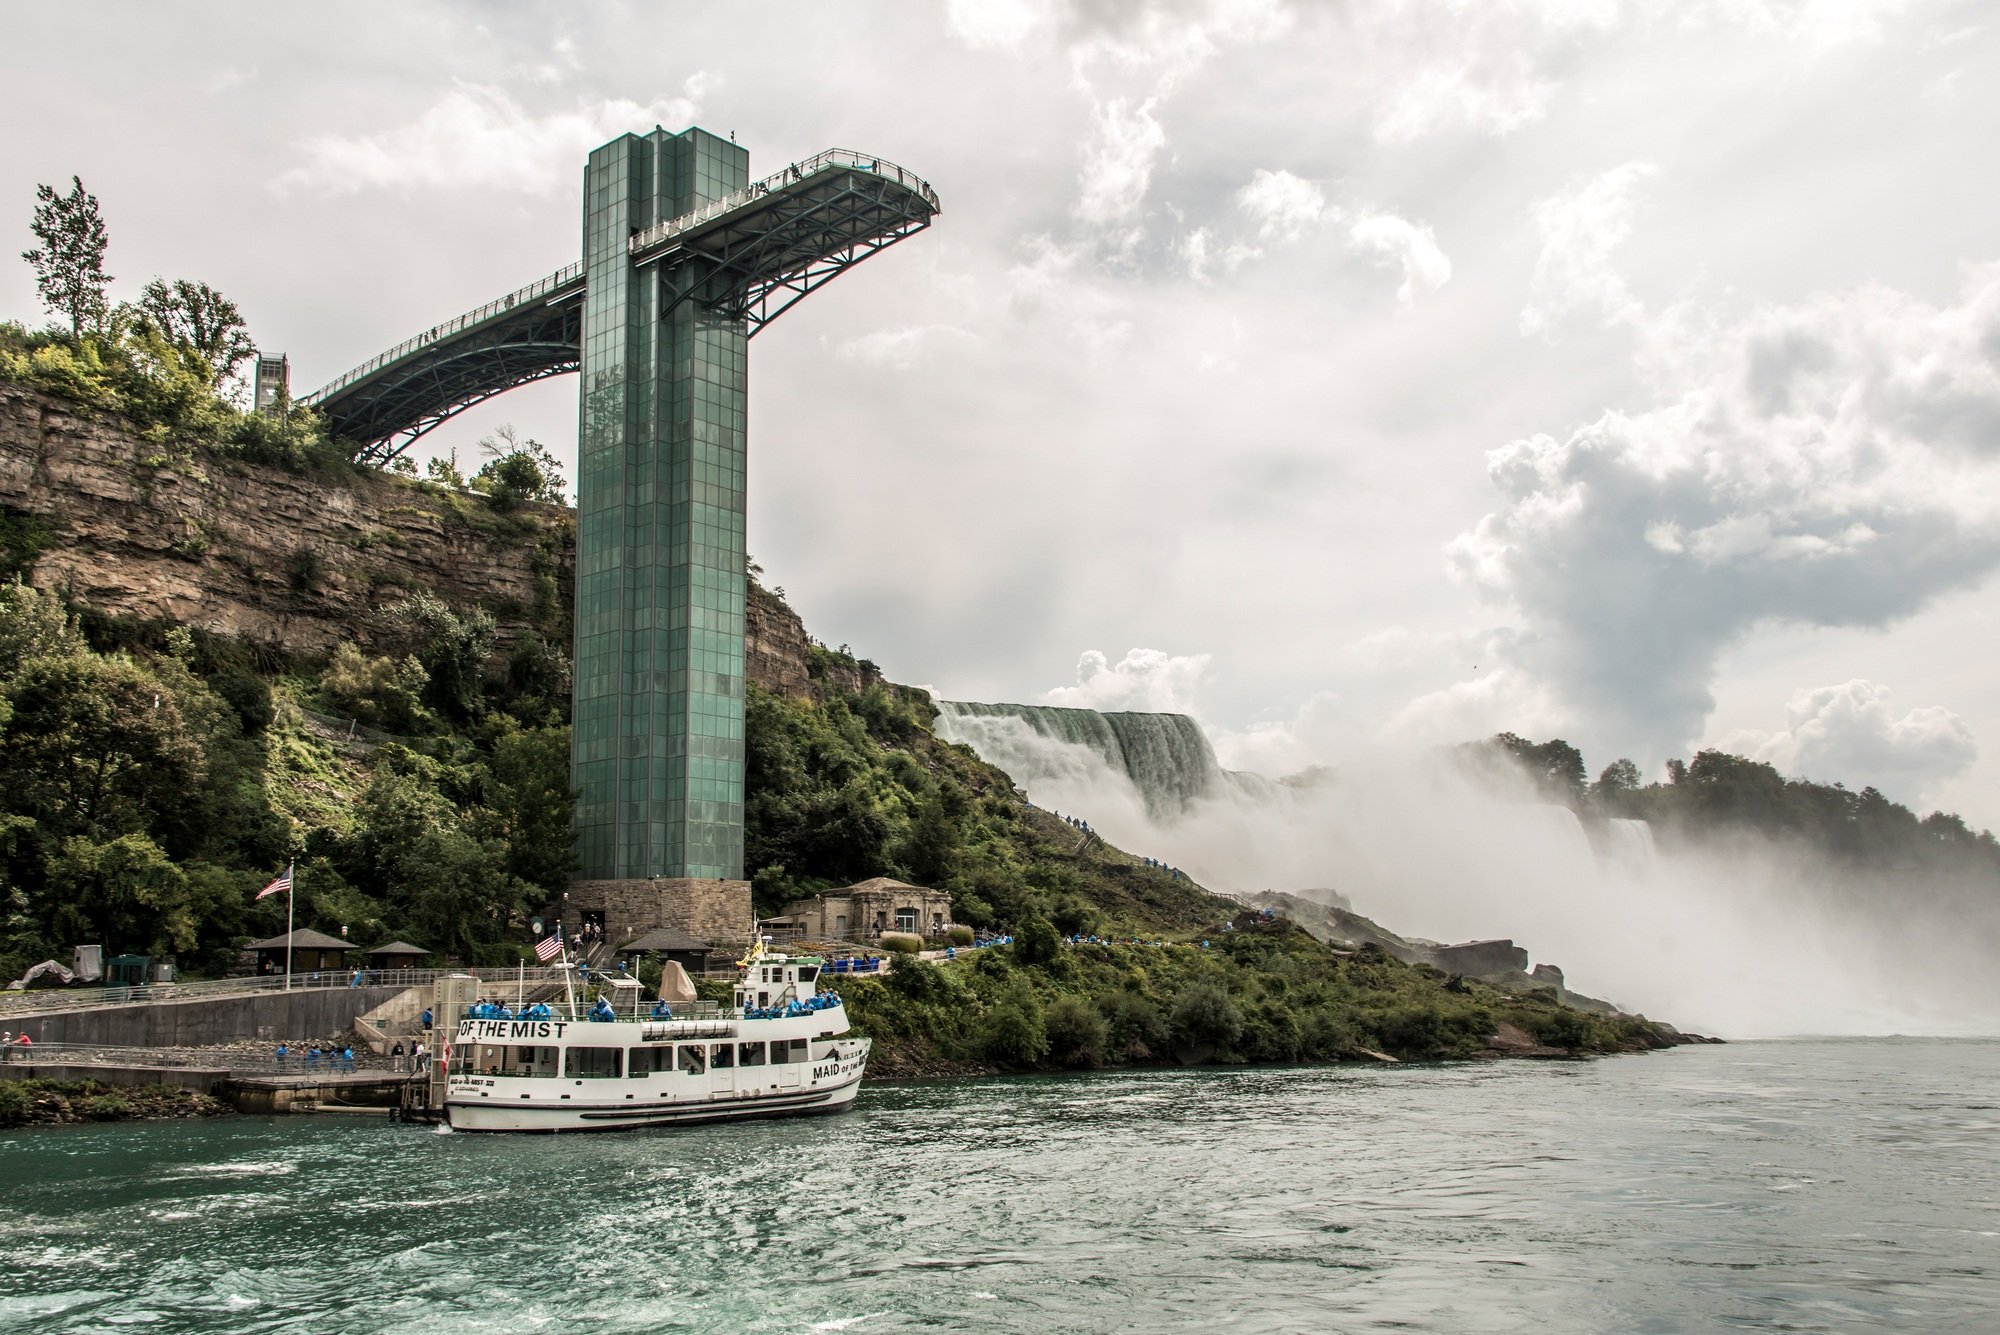 Niagara Falls Observation Tower, also known as Prospect Point Observation Tower 